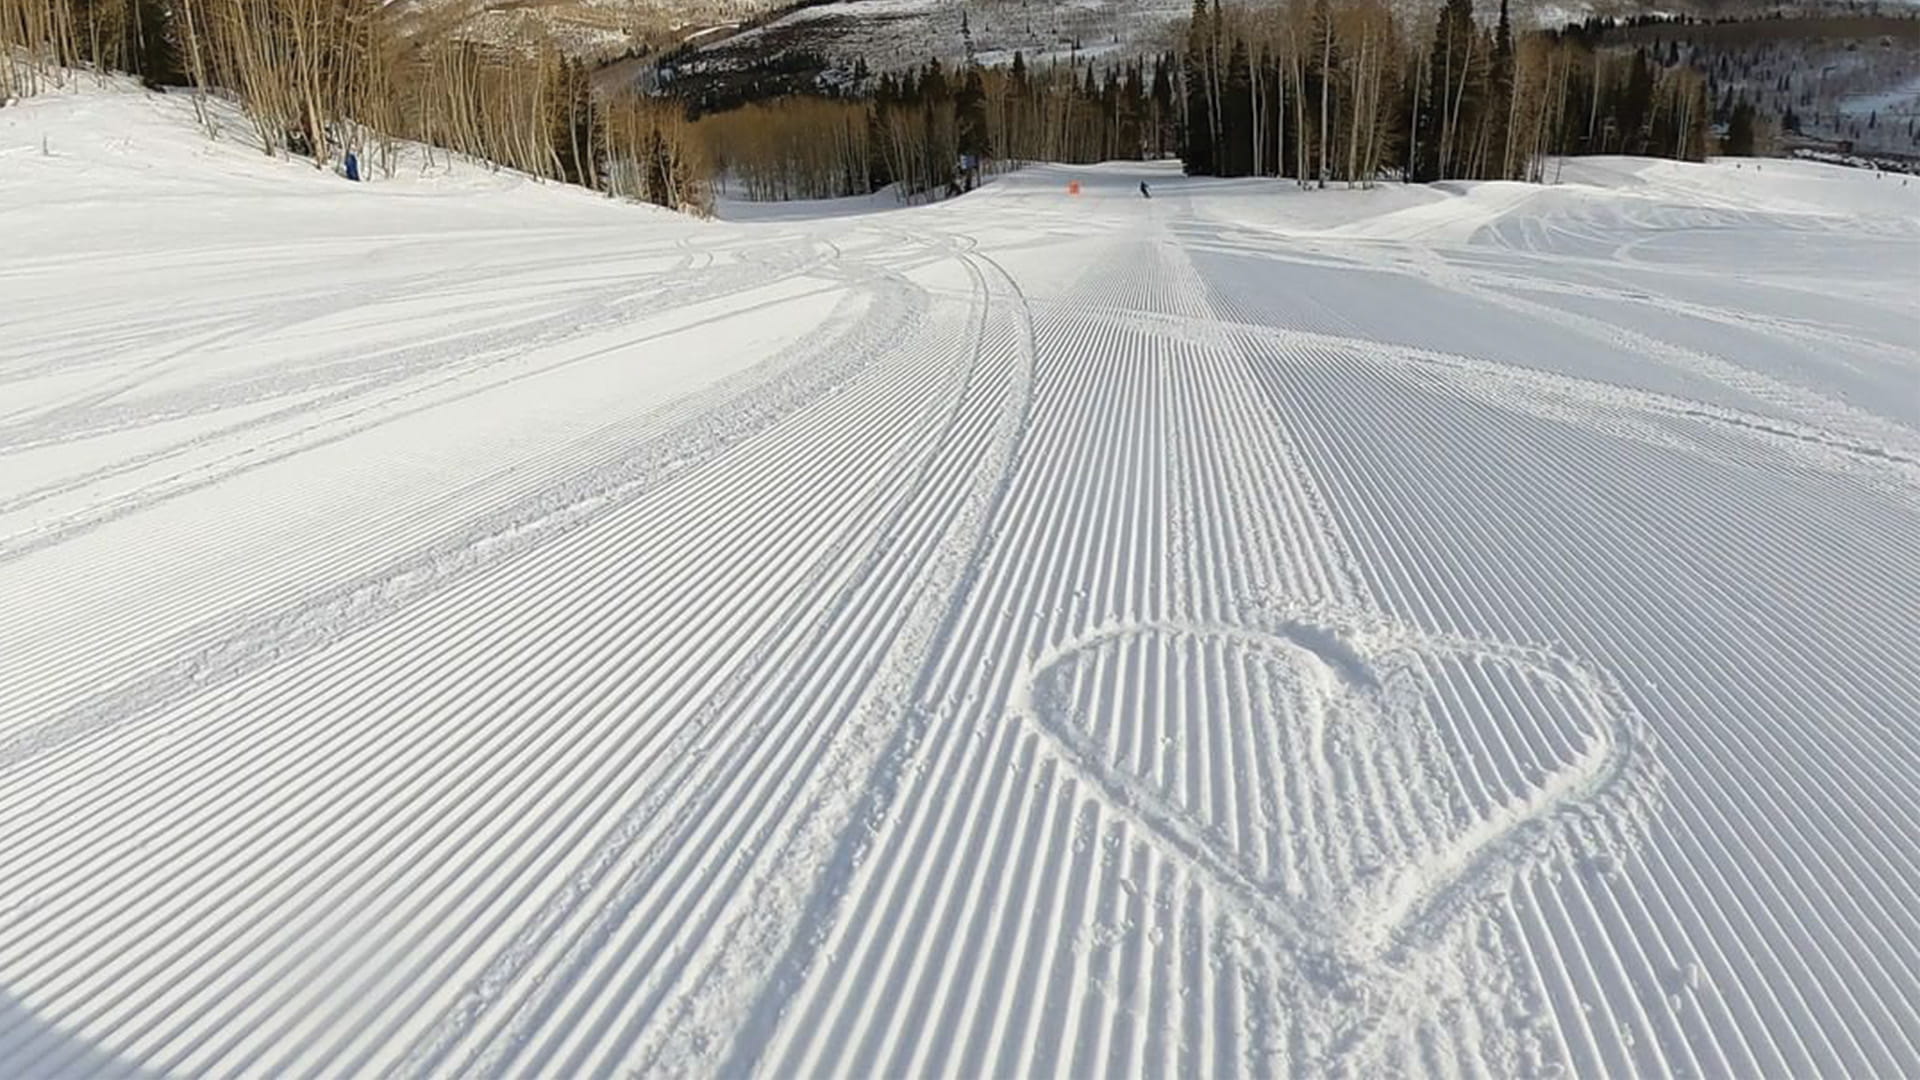 Heart in the snow on a Groomer